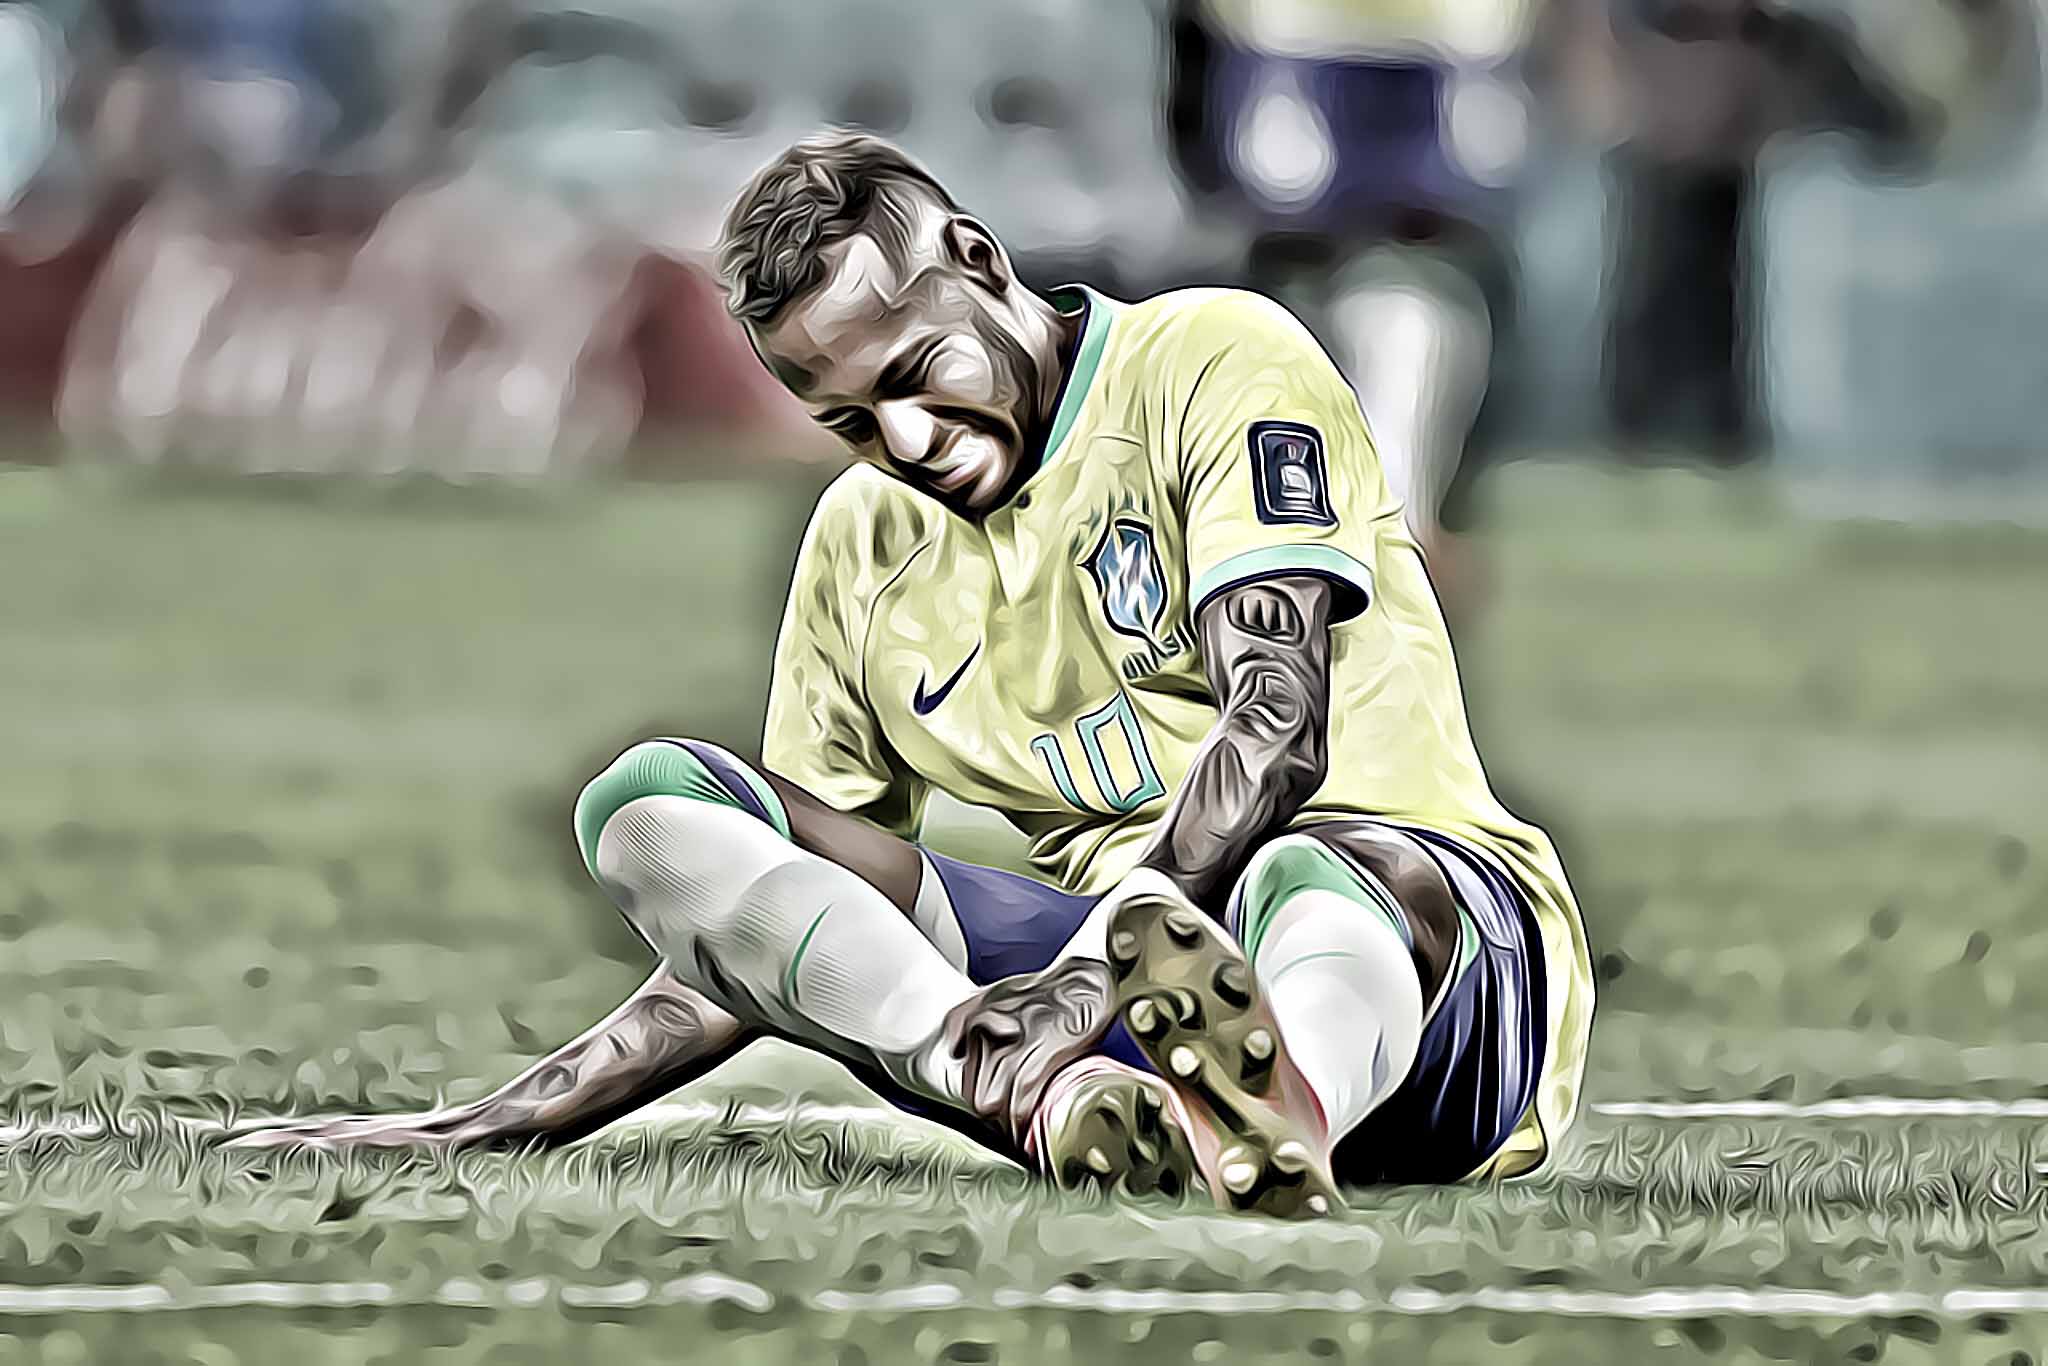 There’s a Palpable Sense of Urgency for Neymar in What is Likely His Last World Cup